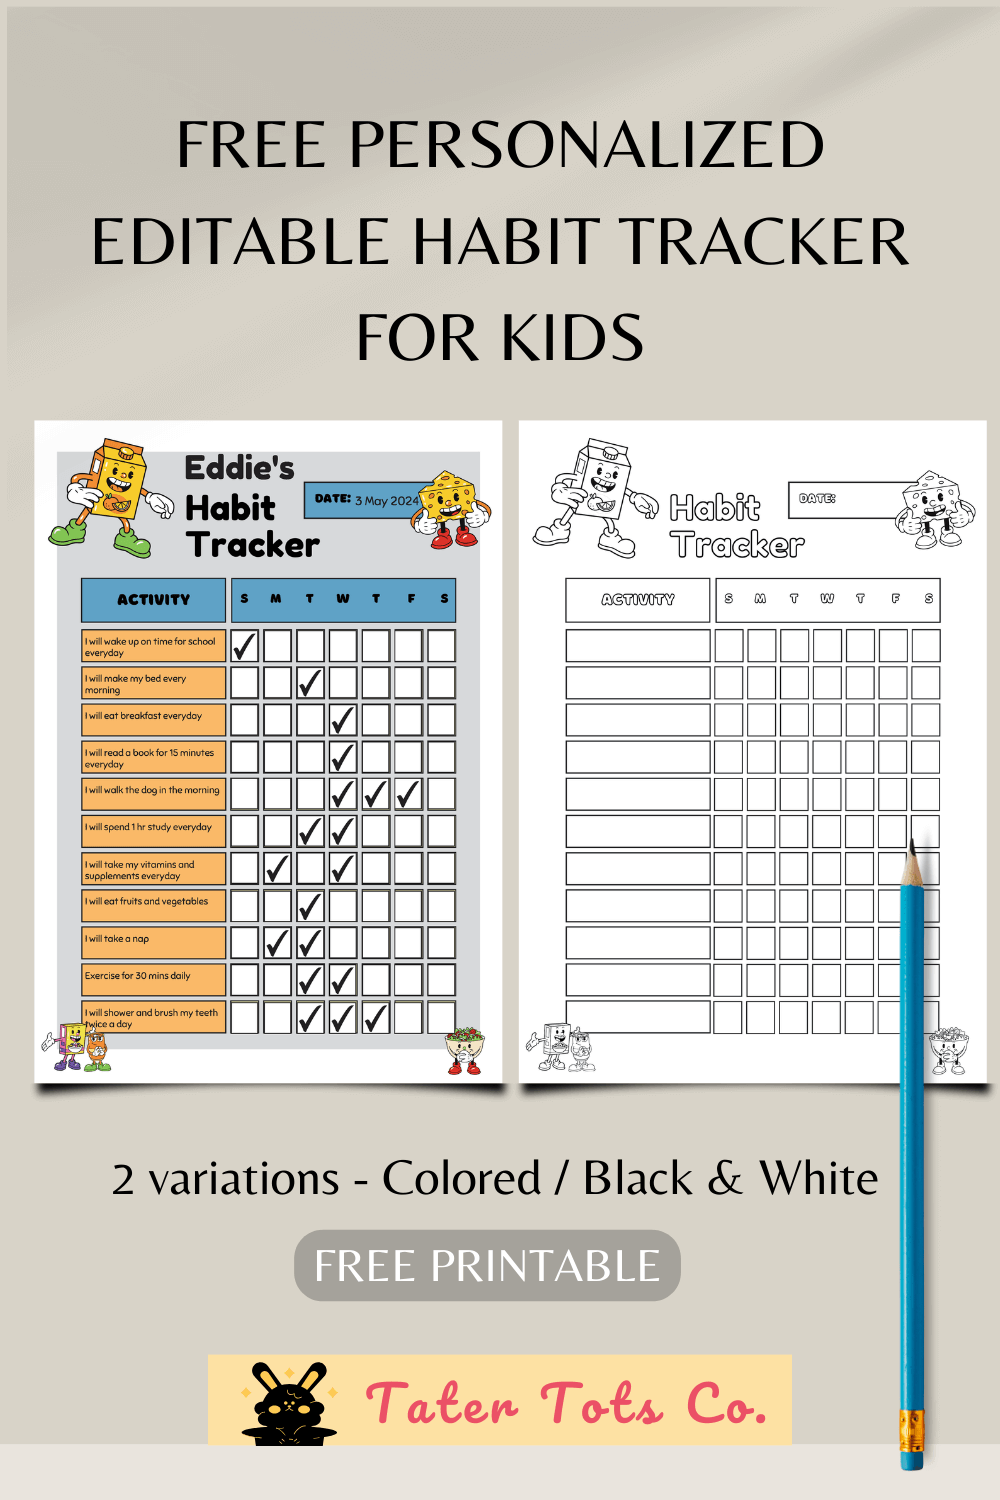 free personalized editable habit tracker for kids colorable version 002